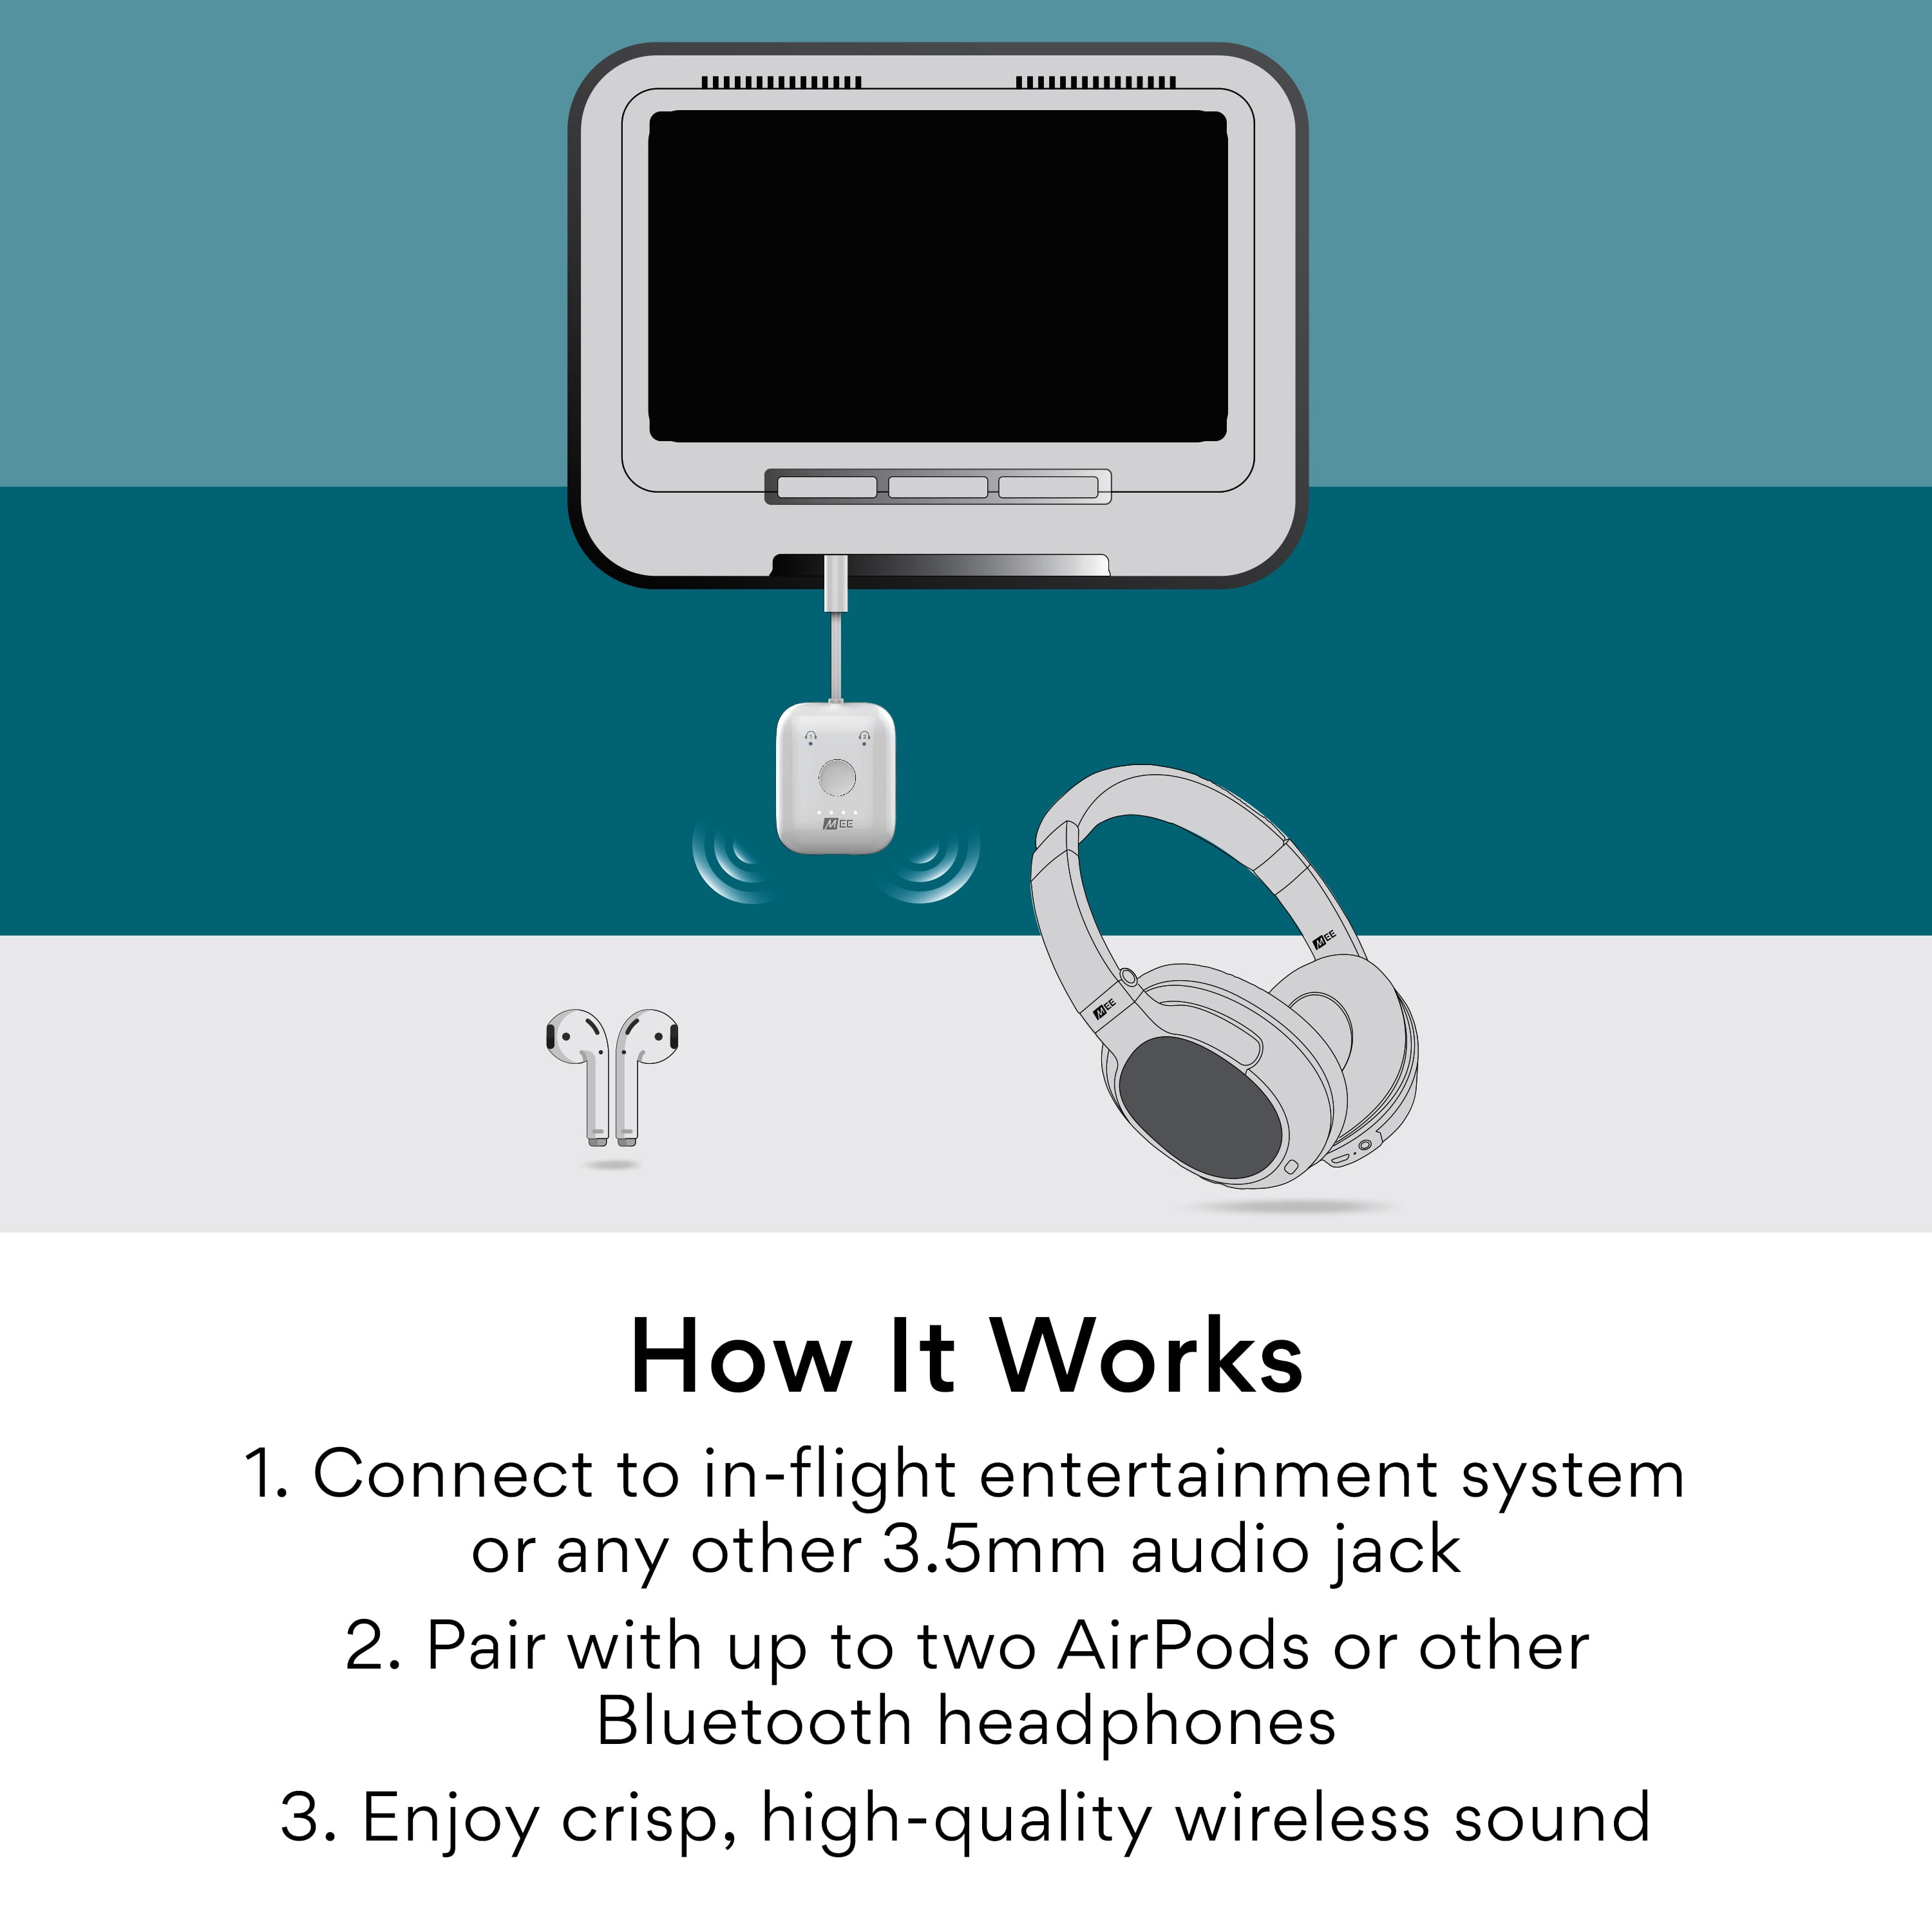 How to use your AirPods with an in-flight entertainment system - The Verge